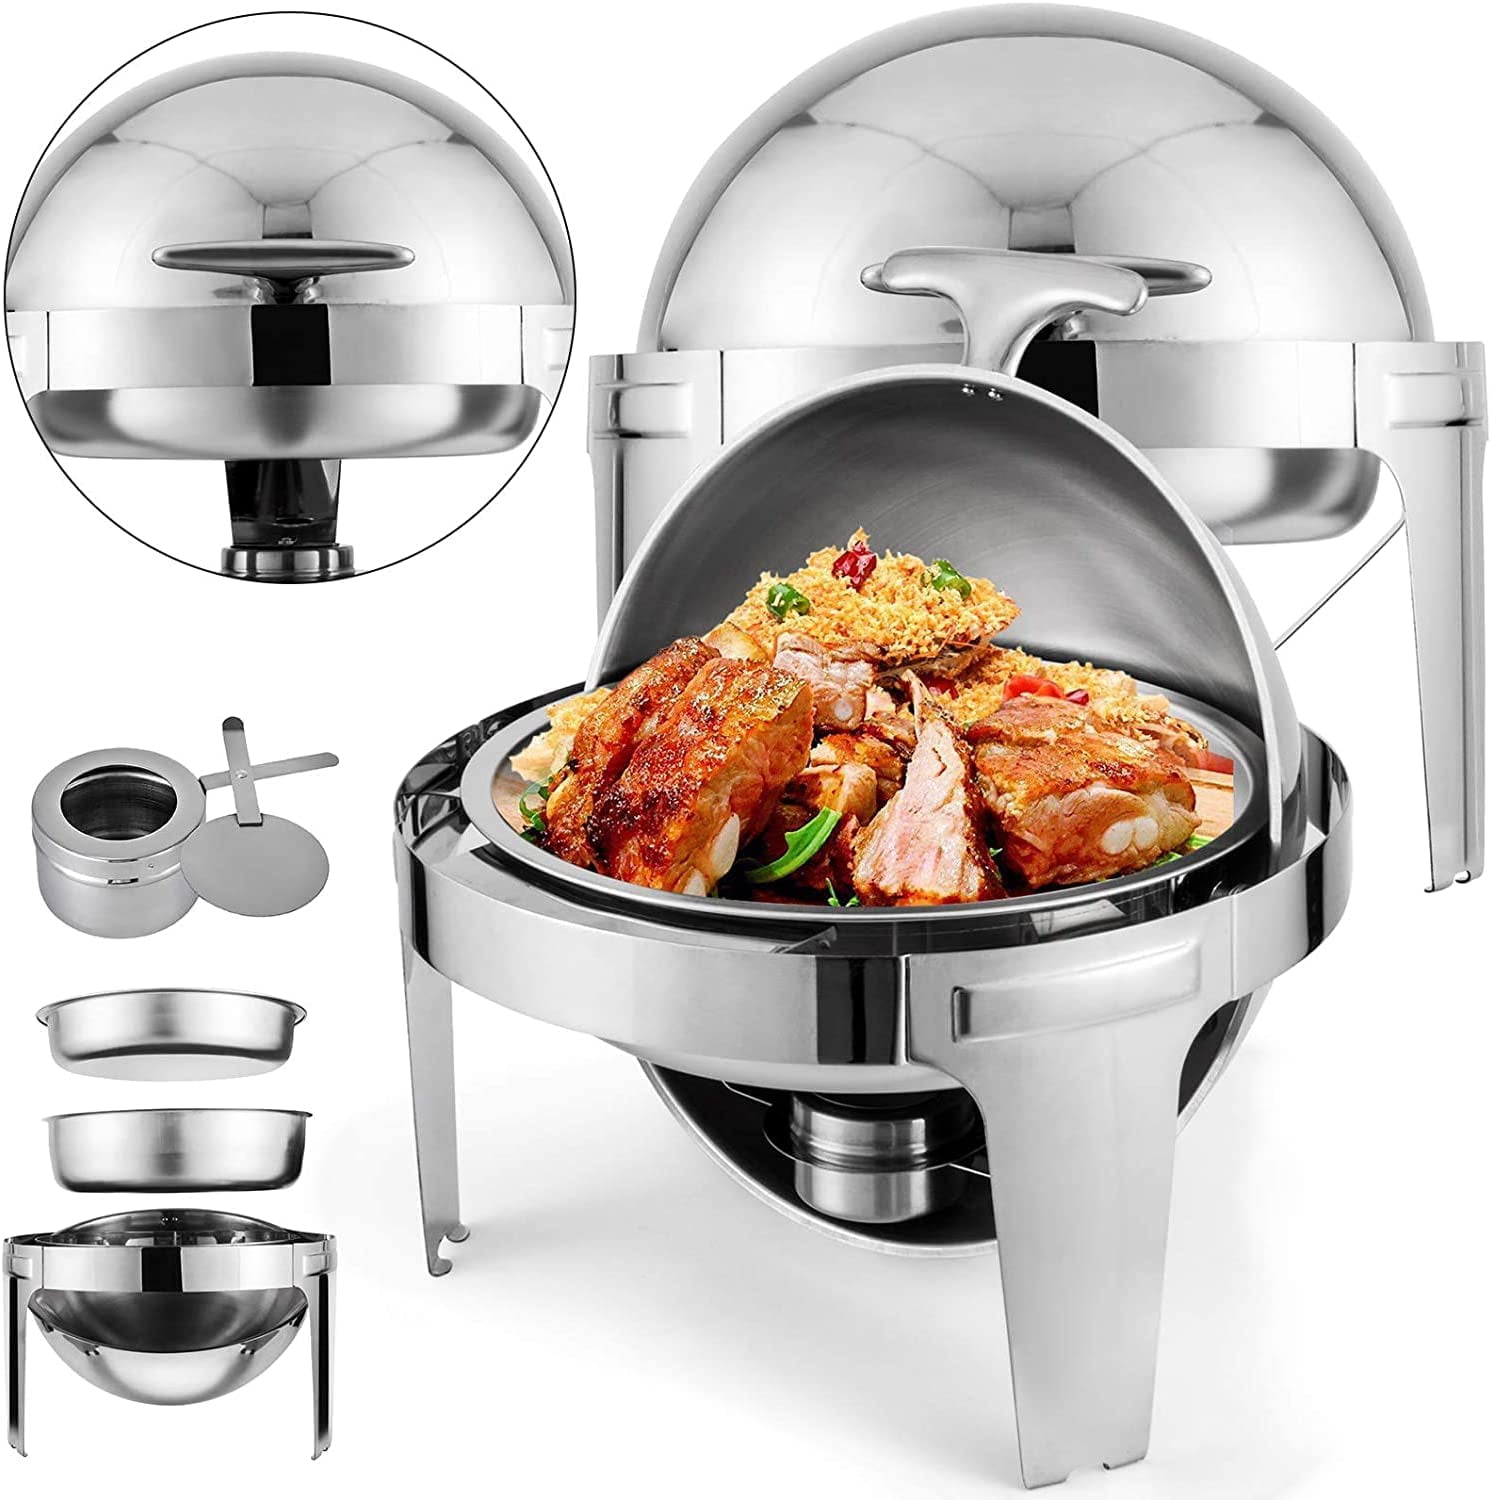 H/ 6 qt. Oval 23 Size Stainless Steel Chrome Accent Chafer Chafing Dish Food Warmer Buffet Set Servers and Warmers for Parties Dishes Warmers, Silver